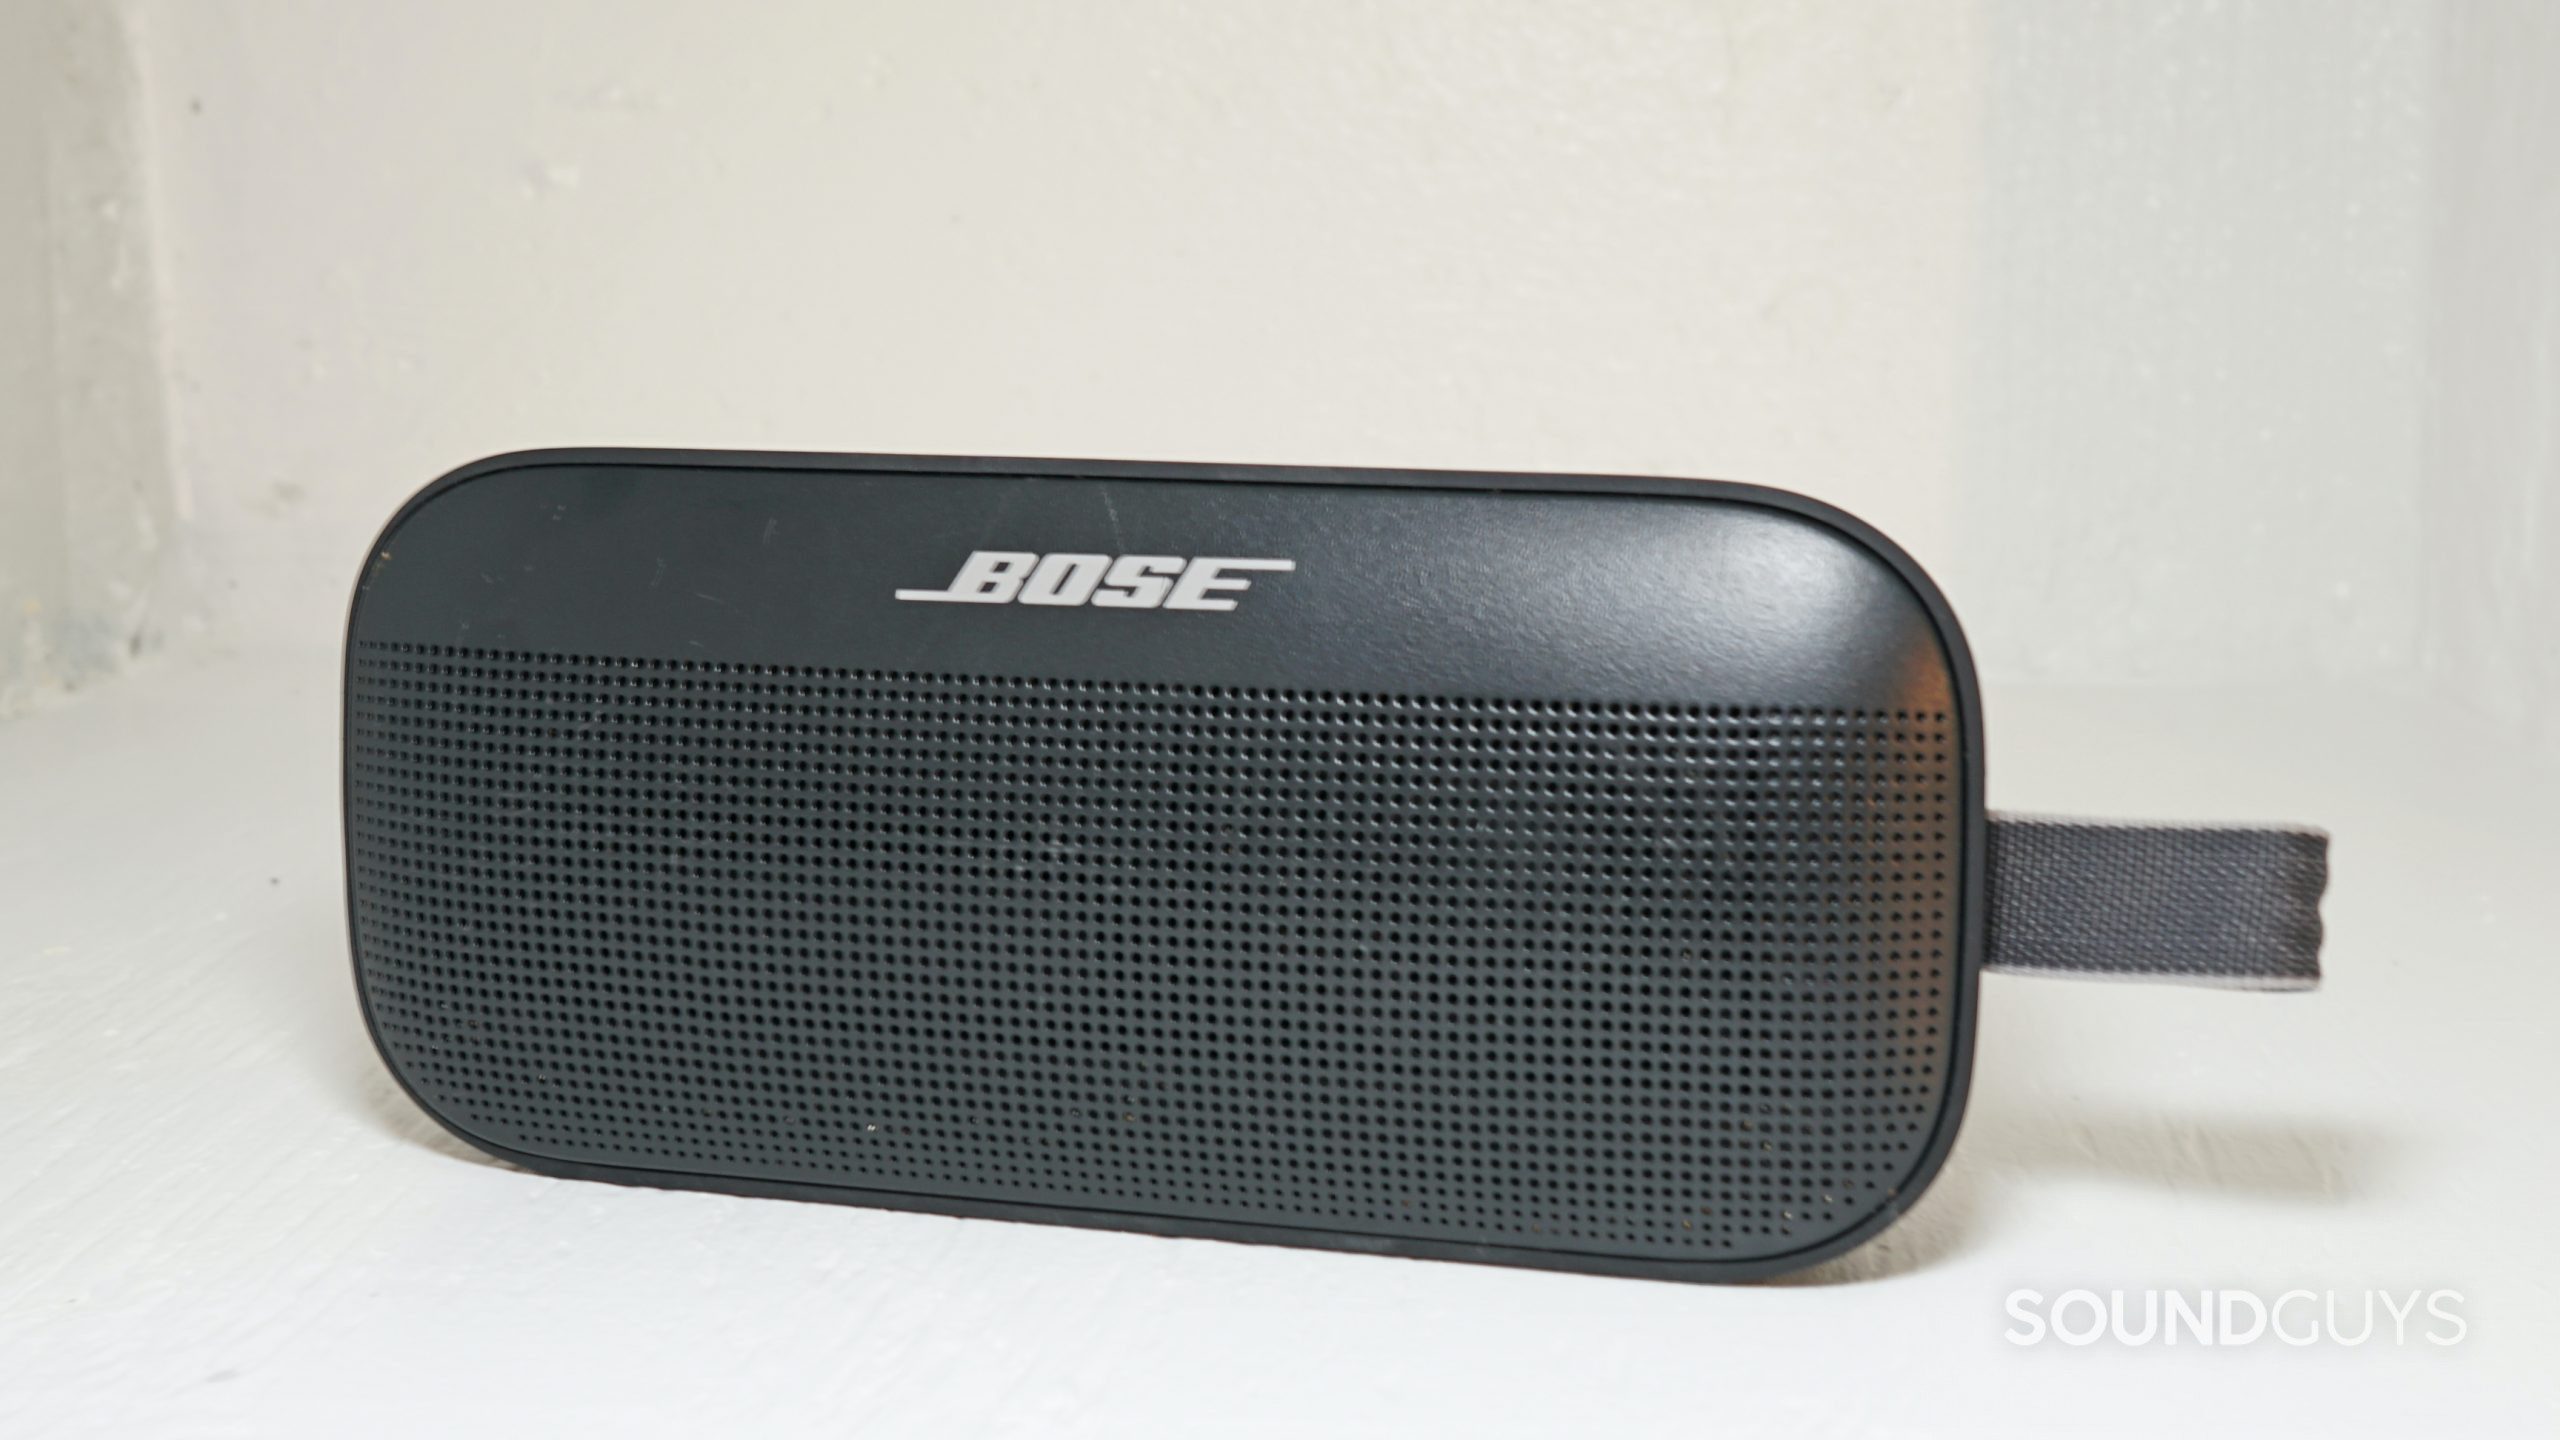 A head-on shot of a Bose SoundLink Flex Bluetooth speaker showing the grille, carrying loop, and logo.